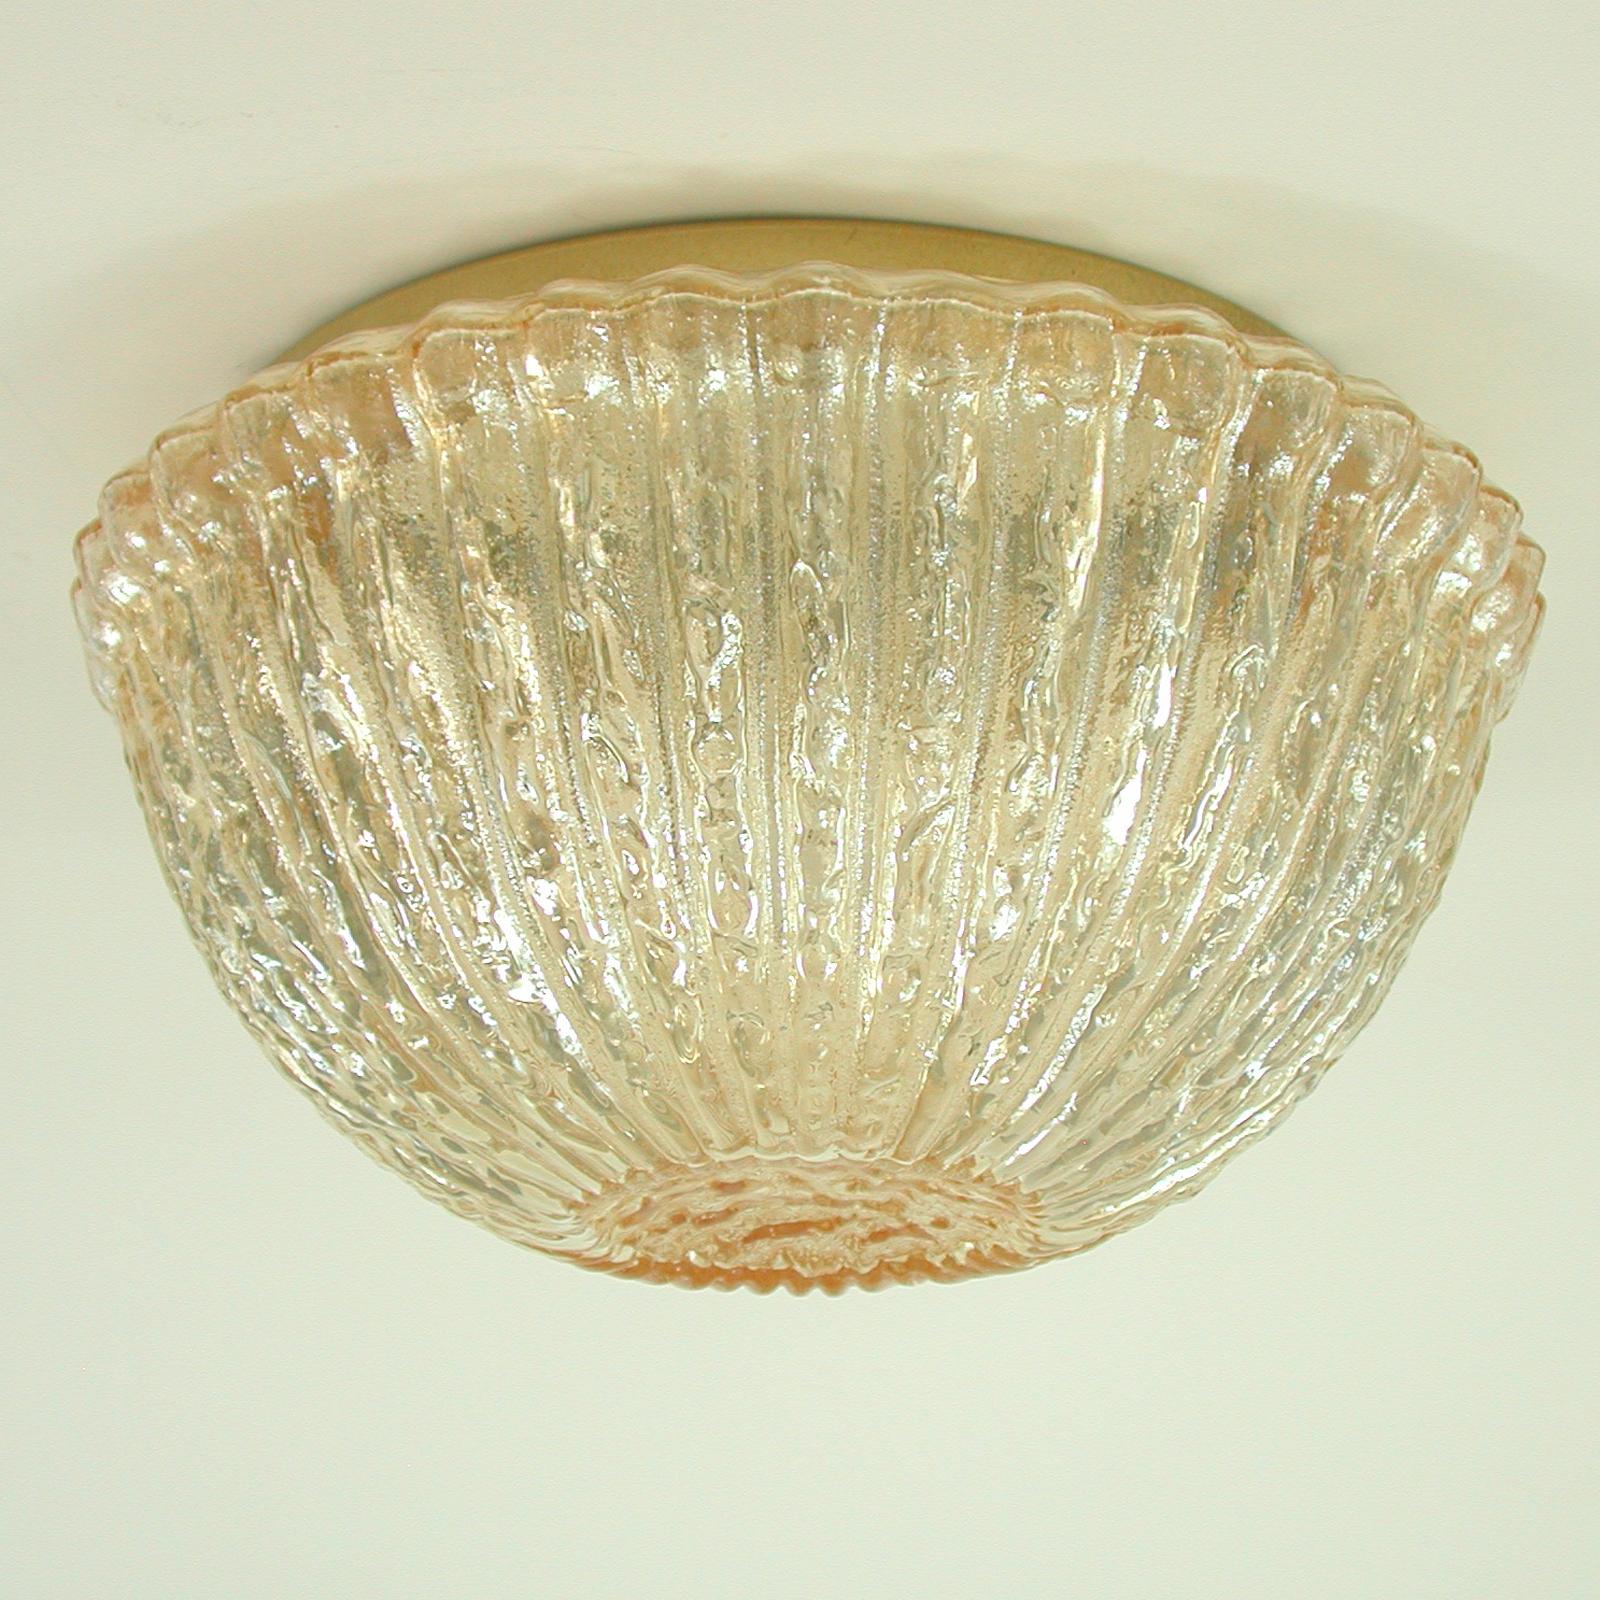 This beautiful 1960s Midcentury flush mount was designed and manufactured in Germany by Glashuette Limburg (model no. A665). It features a thick amber colored textured Murano glass lamp shade and gilt colored mounting. 

The light requires one E27